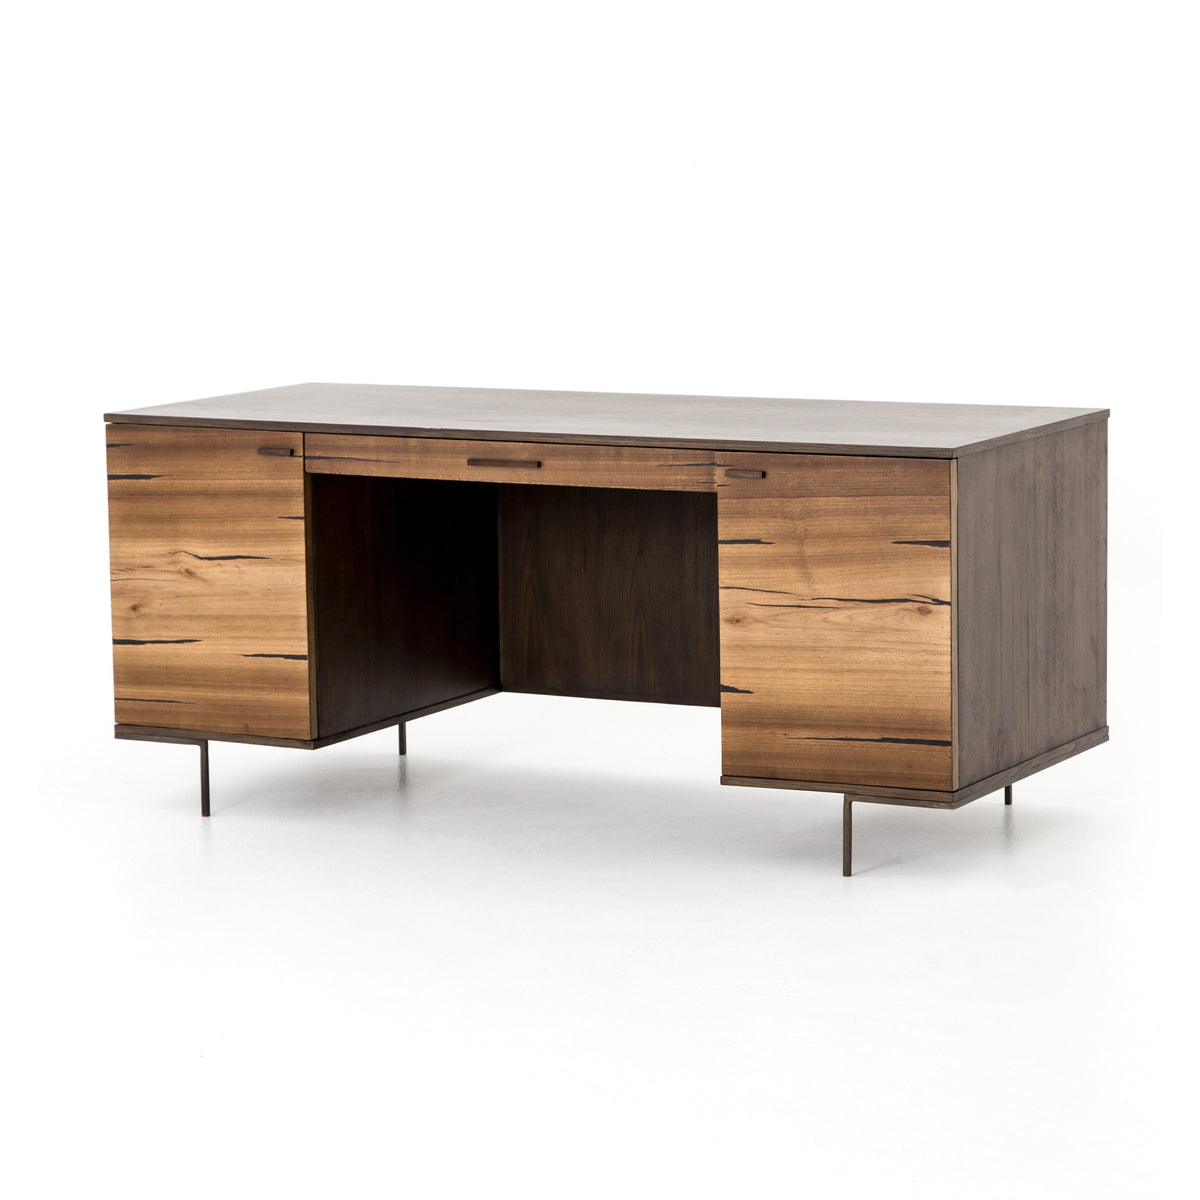 Explore exciting deals and products on Our Axel Desk Yukas Wood Modern ...